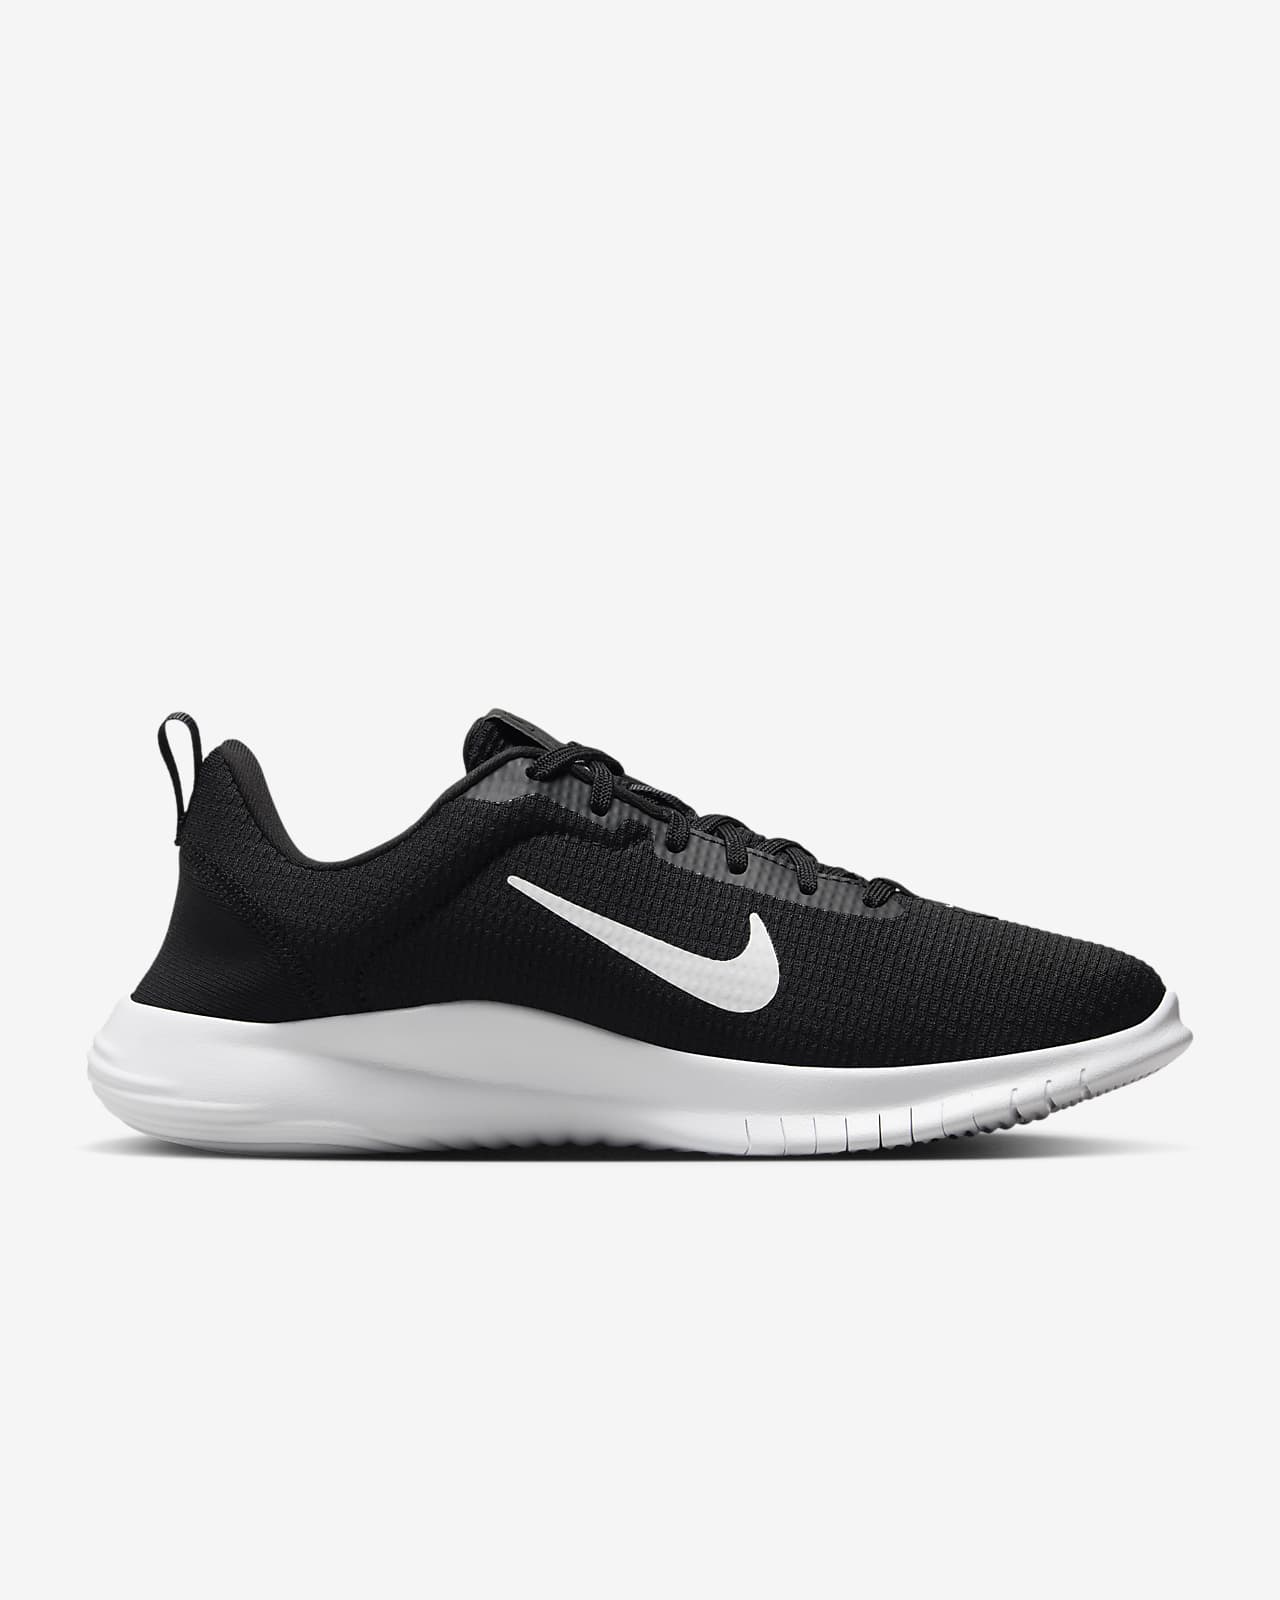 Nike Flex Experience RN 5 Athletic Shoes for Women